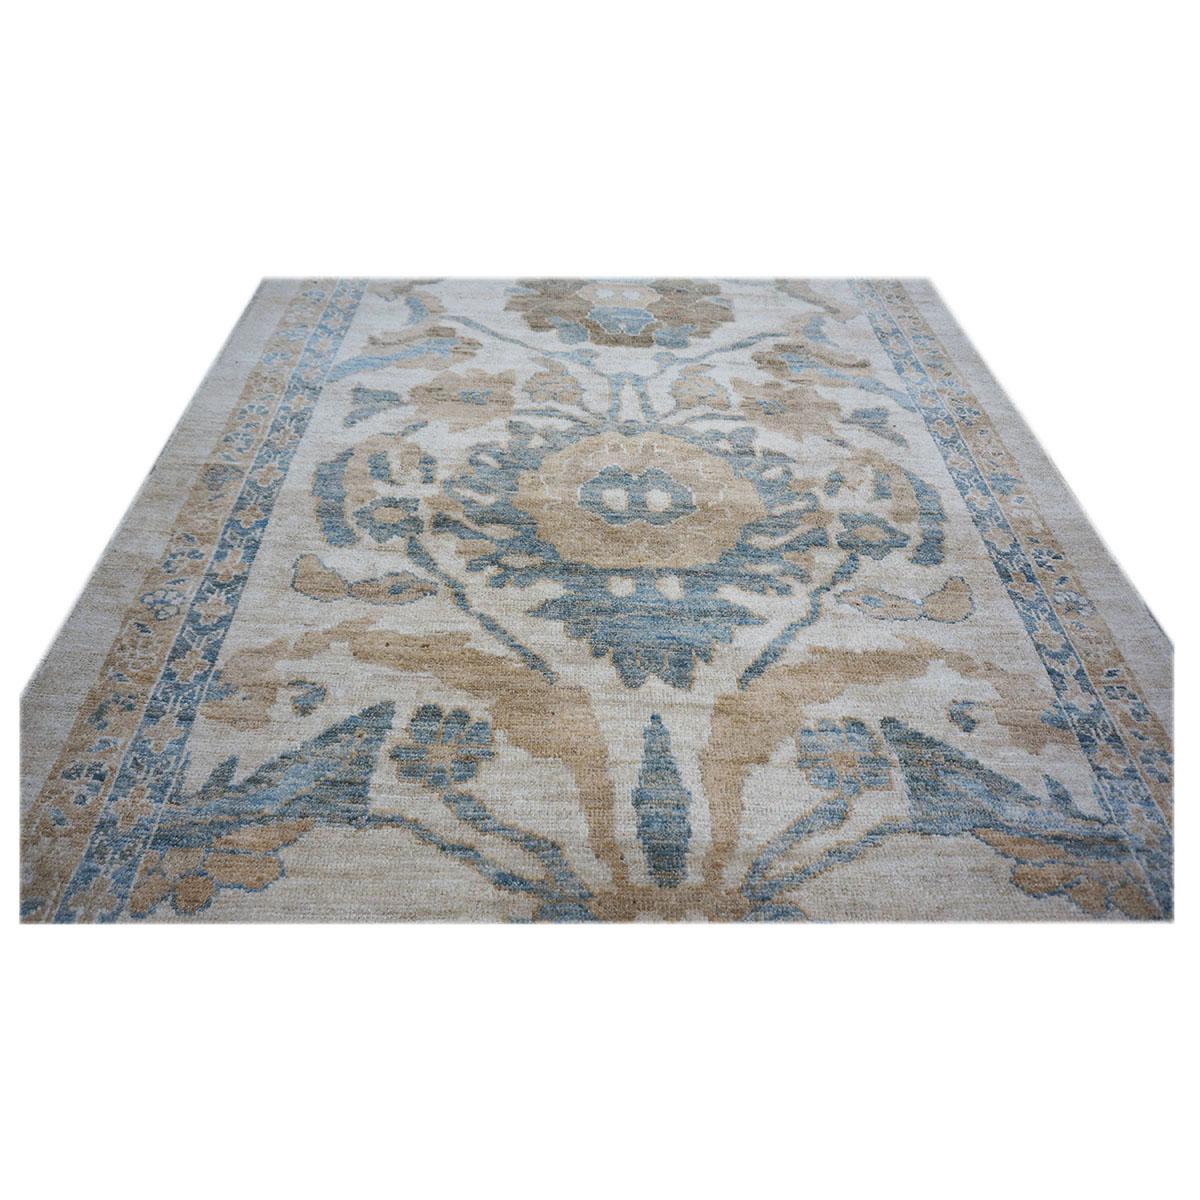 Hand-Woven 21st Century Persian Sultanabad 4x24 Ivory, Tan, & Blue Handmade Hall Runner Rug For Sale